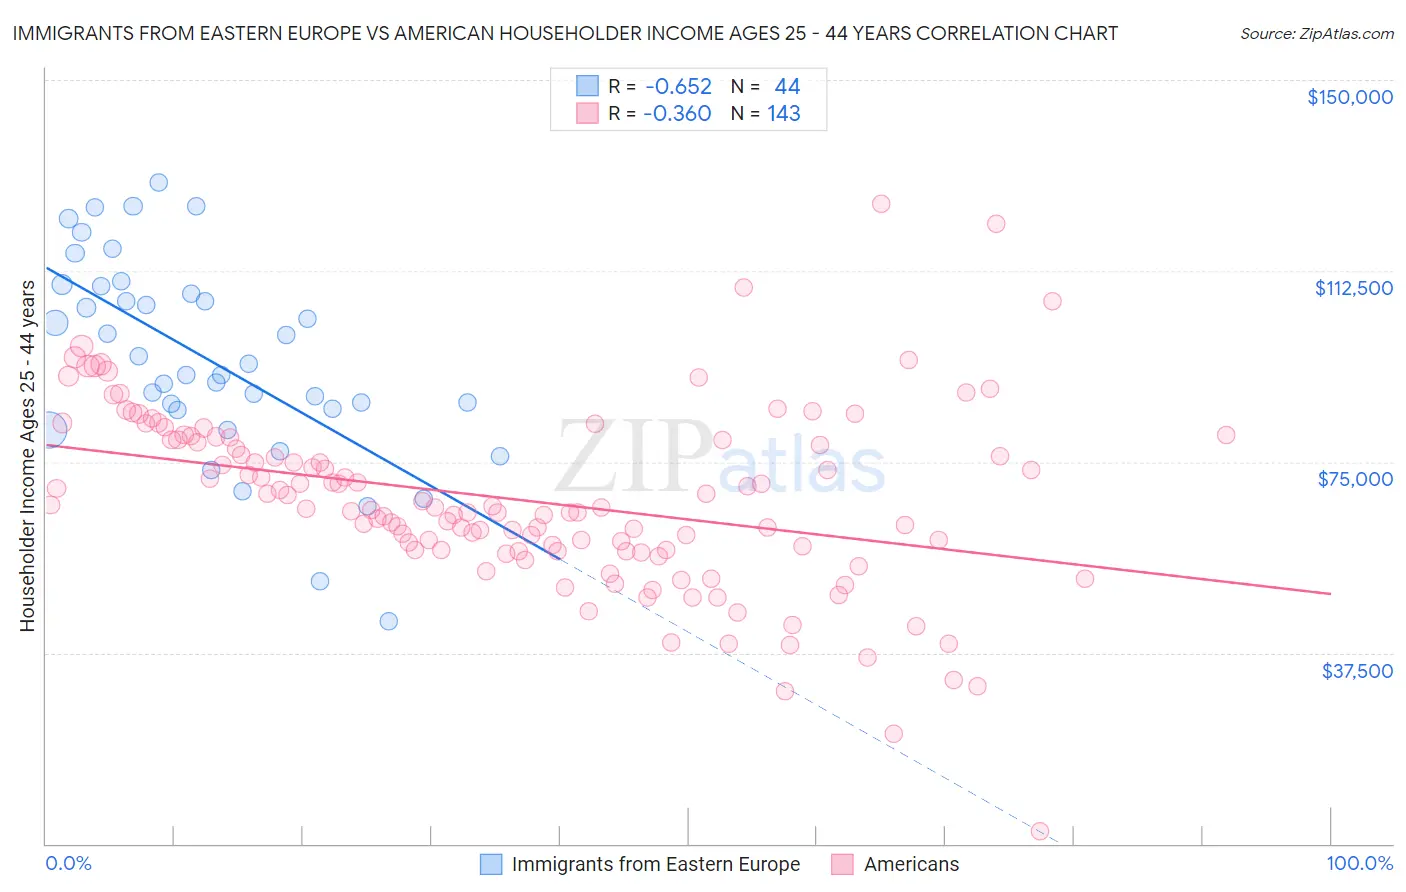 Immigrants from Eastern Europe vs American Householder Income Ages 25 - 44 years